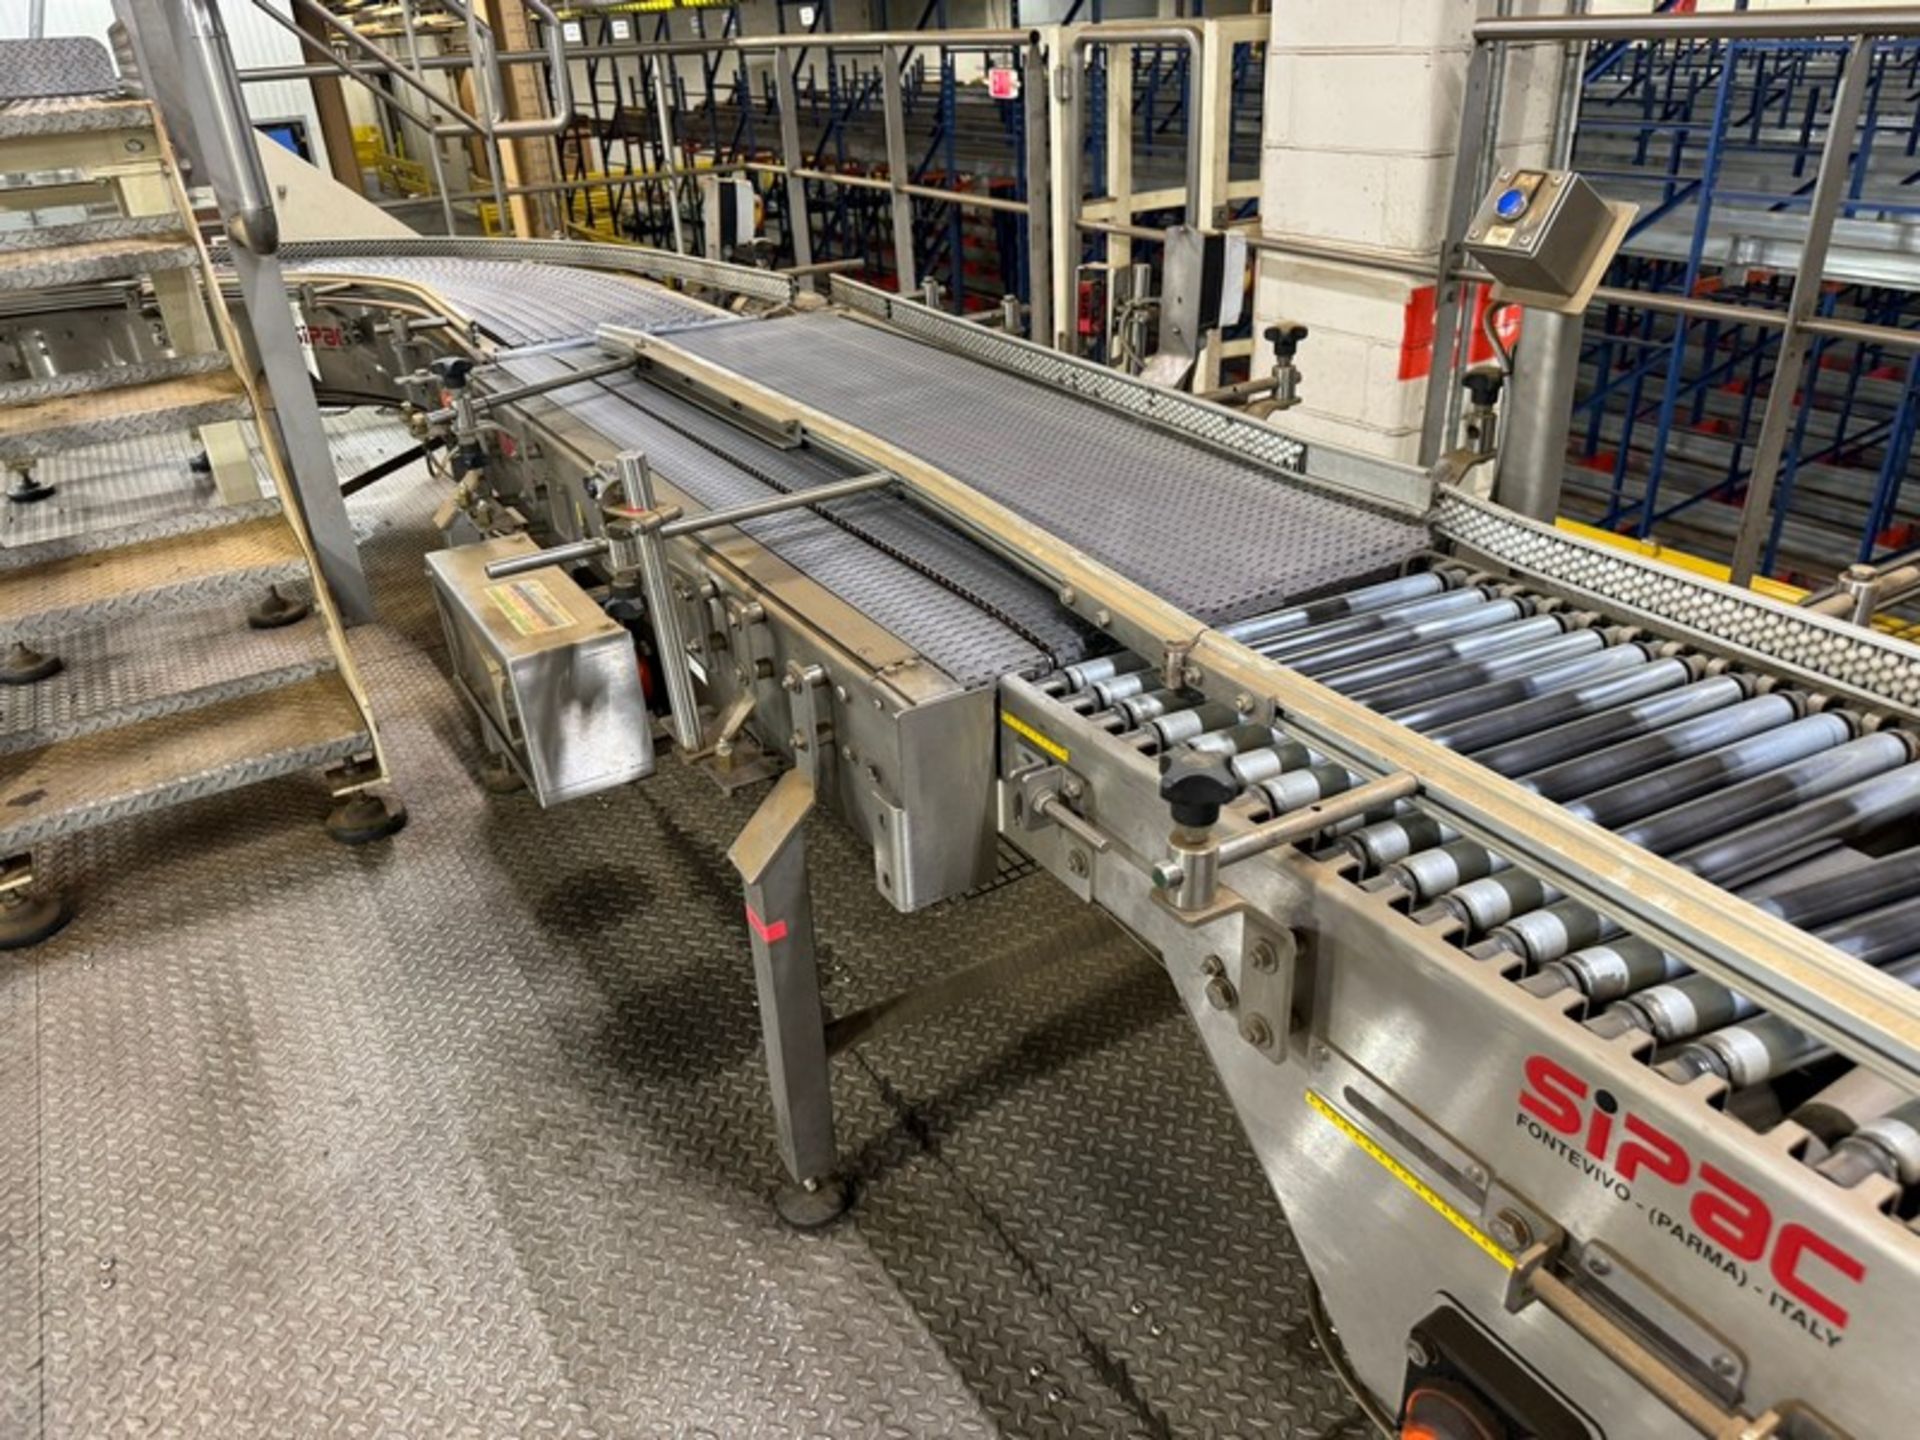 Section of Conveyor, with 1-Section of SIPAC Roller Conveyor, with 1-Section of 90 Degree Turn - Image 7 of 12